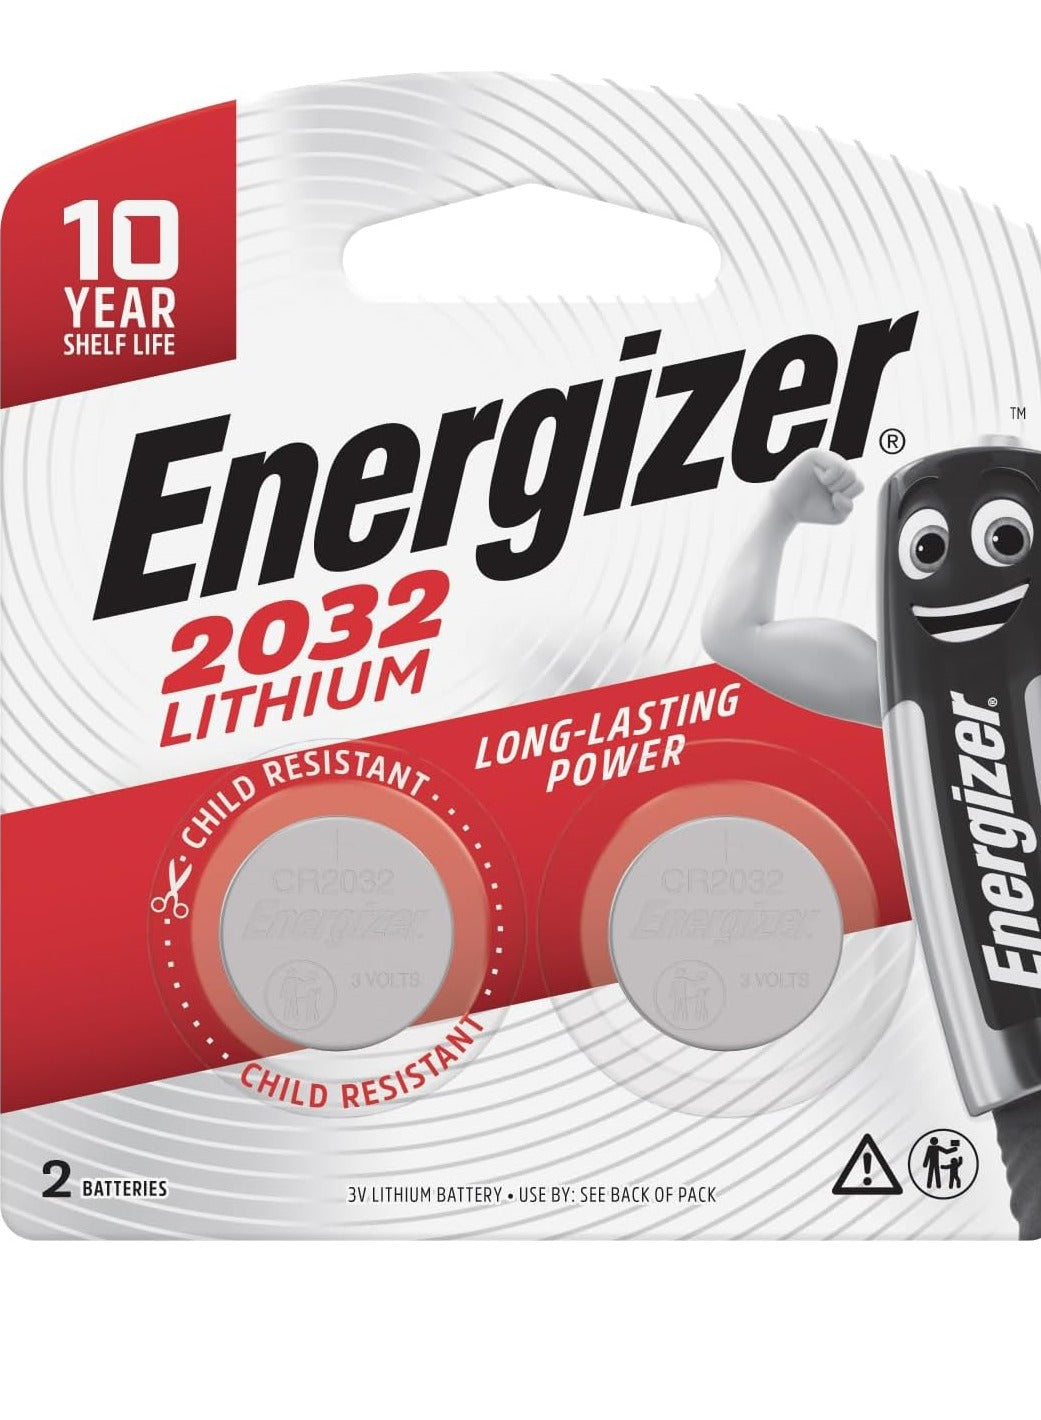 Energizer Queen Battery 2032 Set of 2 Blister Cards - quality material used in It's construction makes it durable.